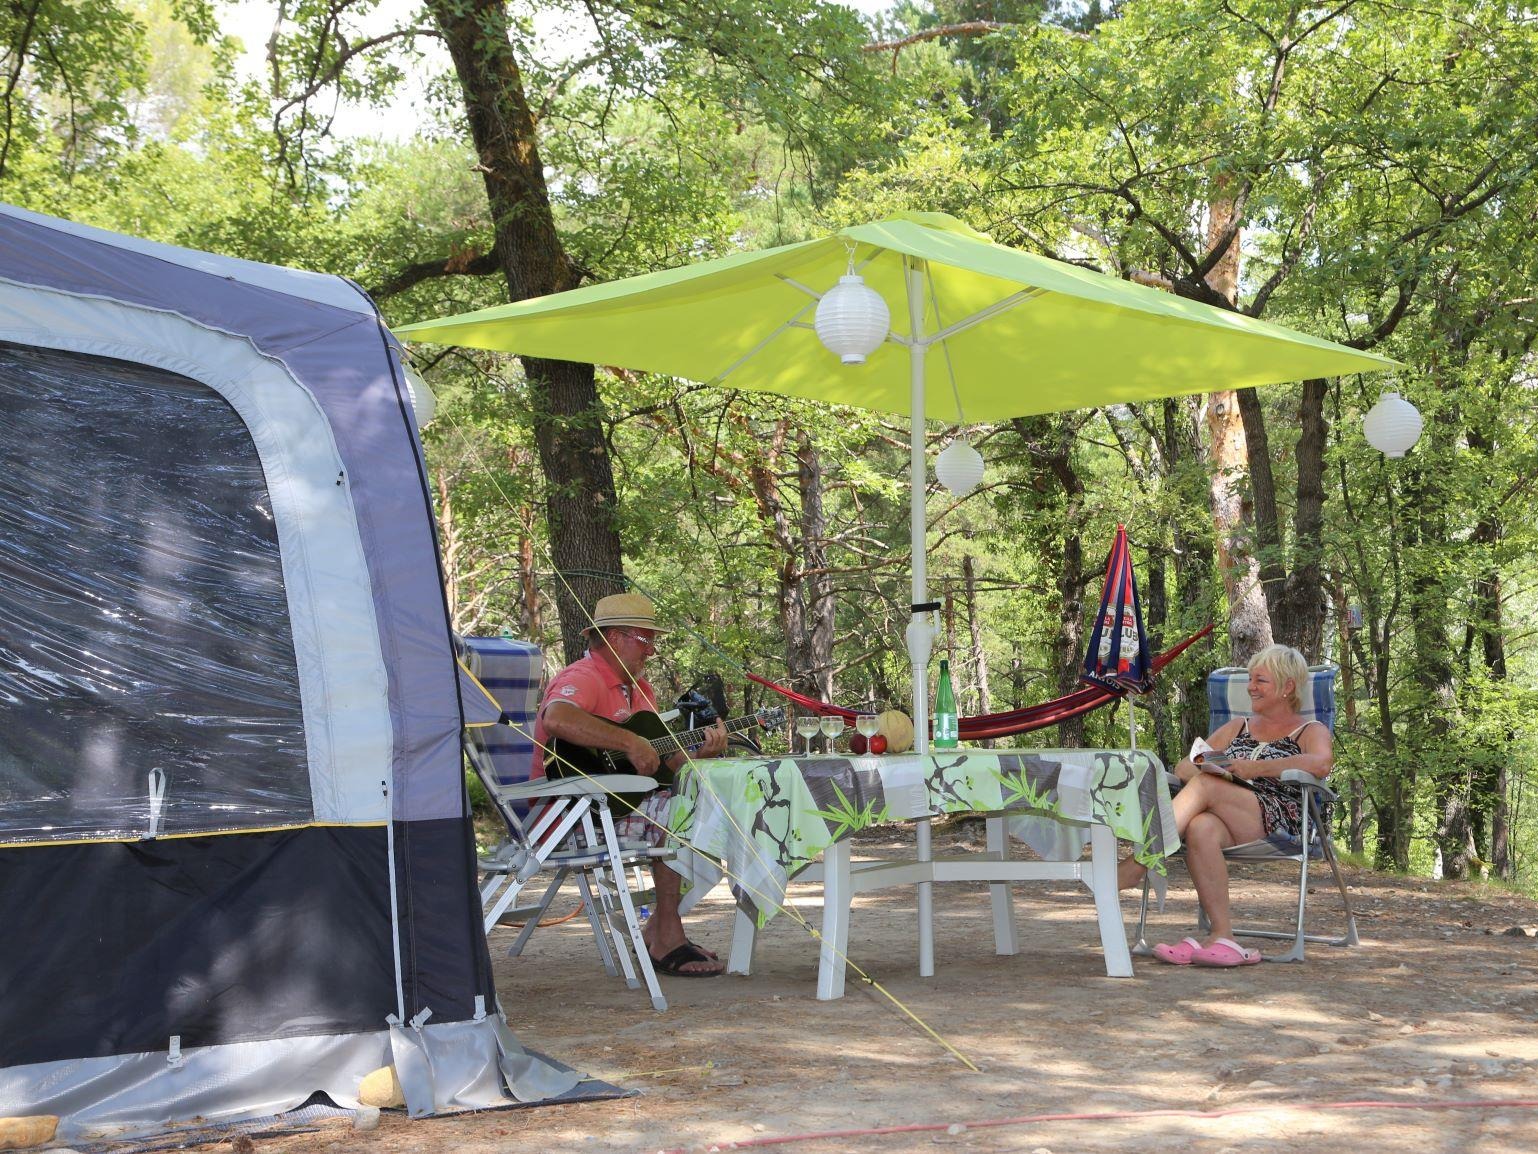 franzosisch-camping Camping Le Moulin Moustiers Sainte Marie